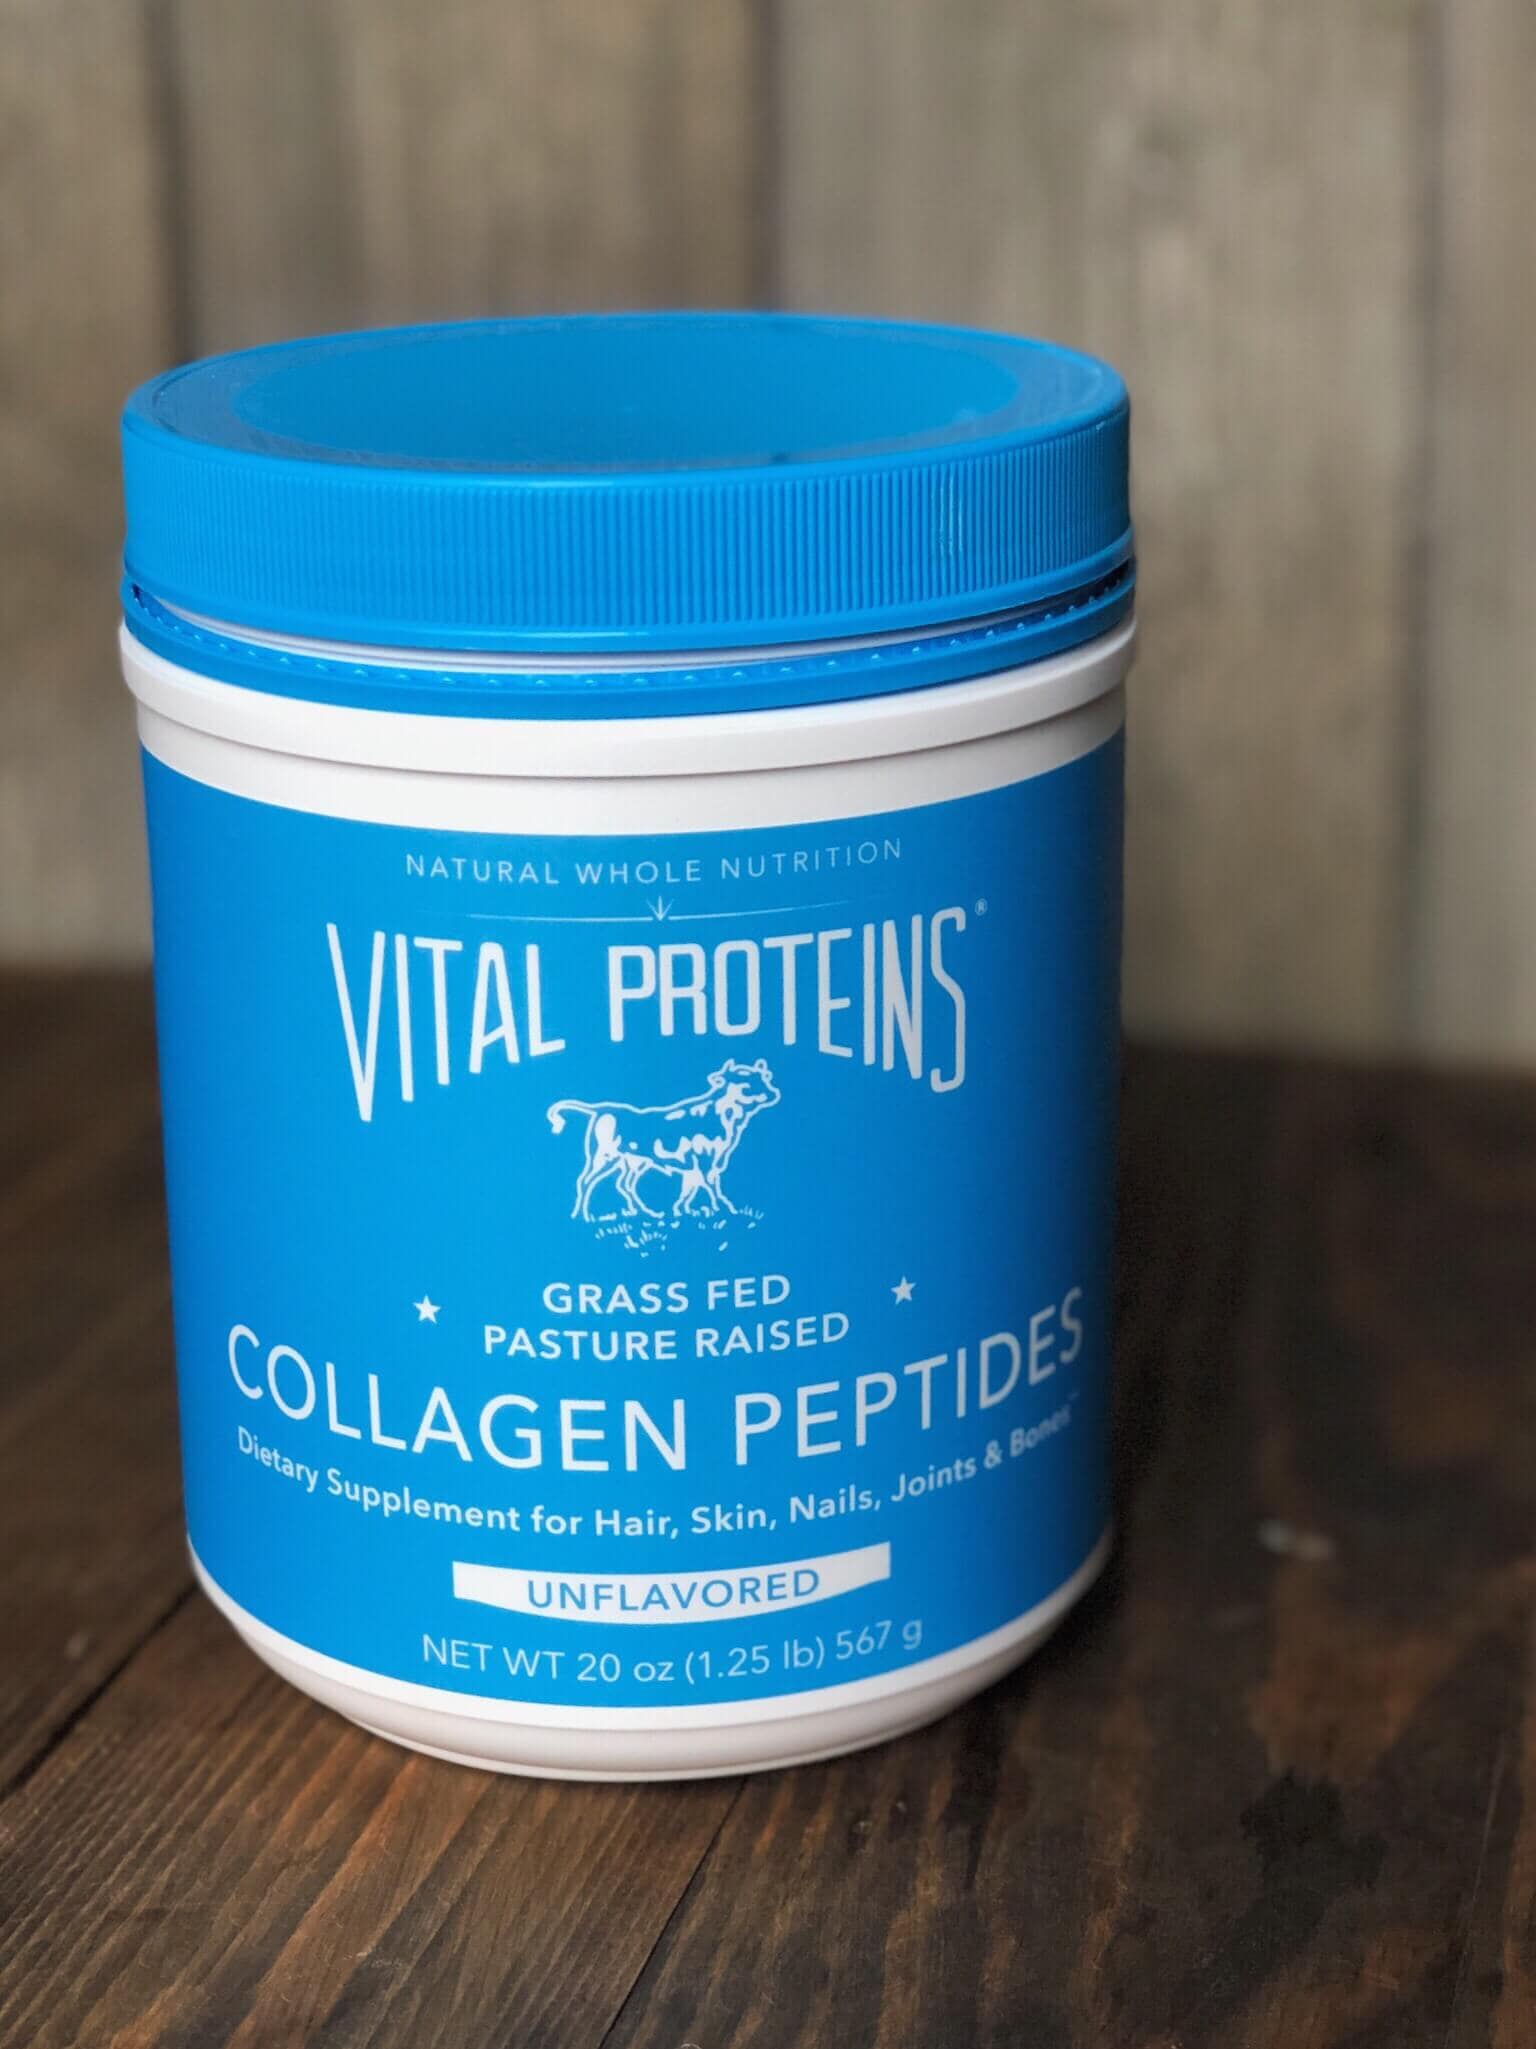 A canister of vital proteins collagen peptides on a wood background